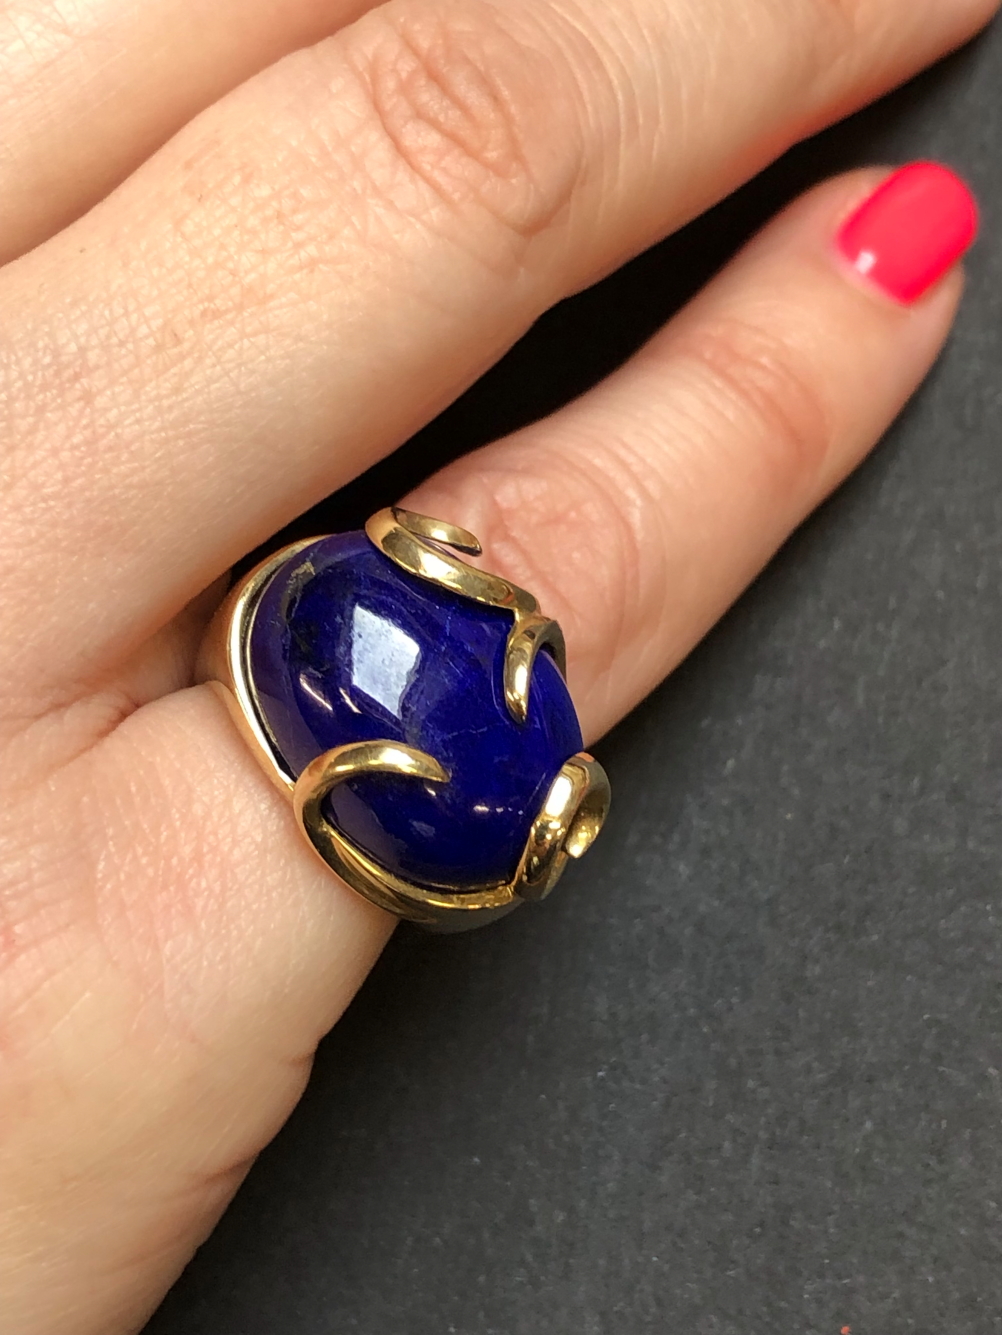 A CONTEMPORARY LAPIS LAZULI AND 9ct HALLMARKED GOLD RING. FINGER SIZE K. WEIGHT 8.73grms. - Image 5 of 8